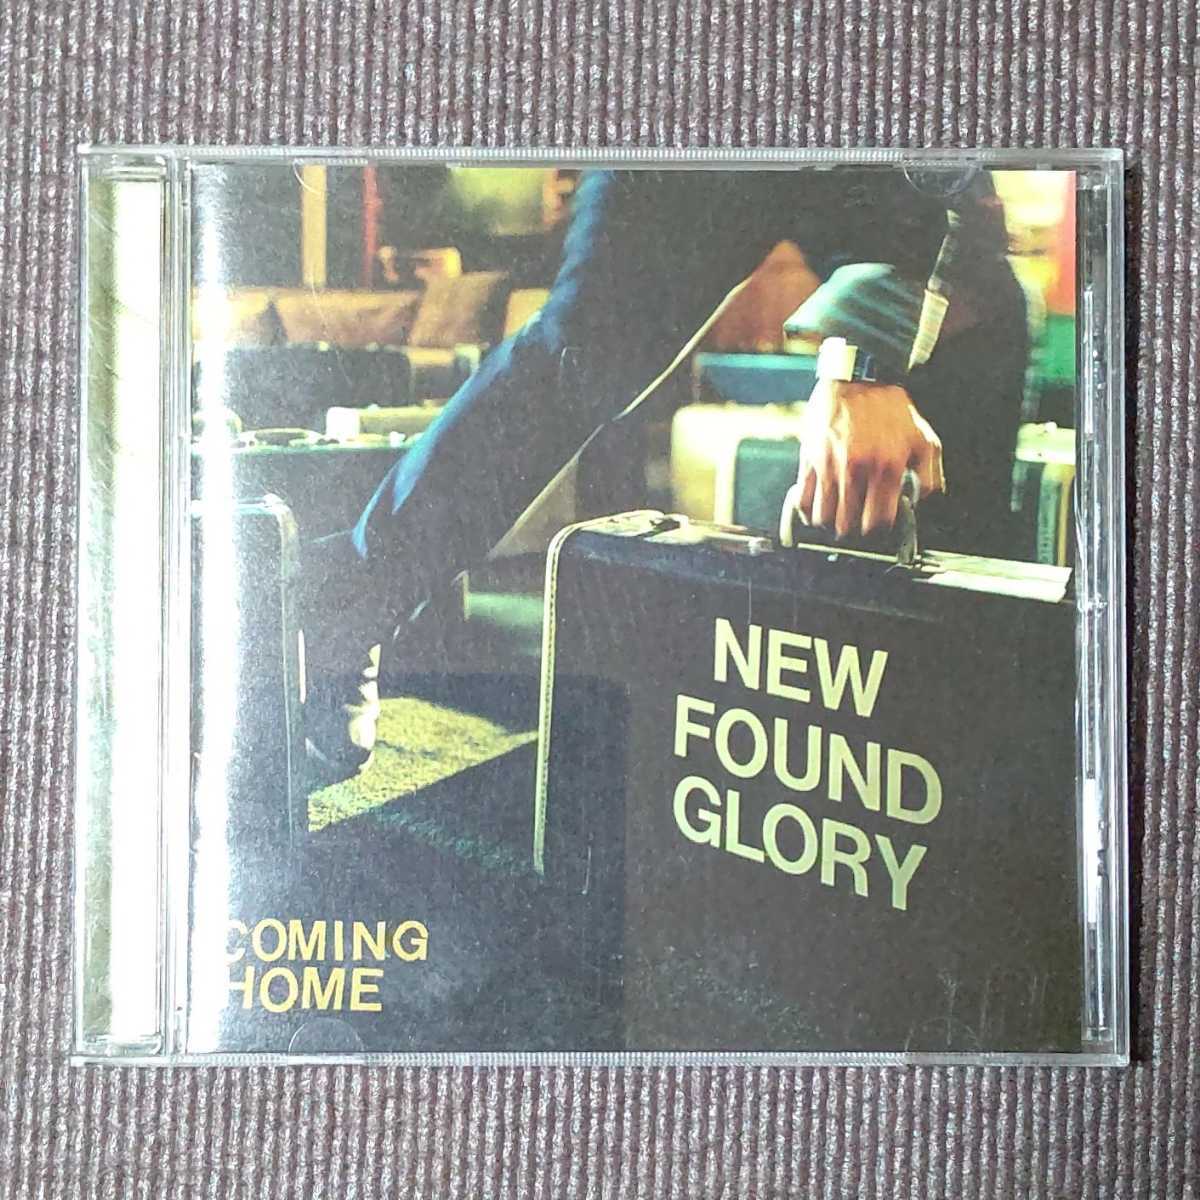 New Found Glory - Coming Home　輸入盤　ニューファウンドグローリー　送料無料　即決　迅速発送